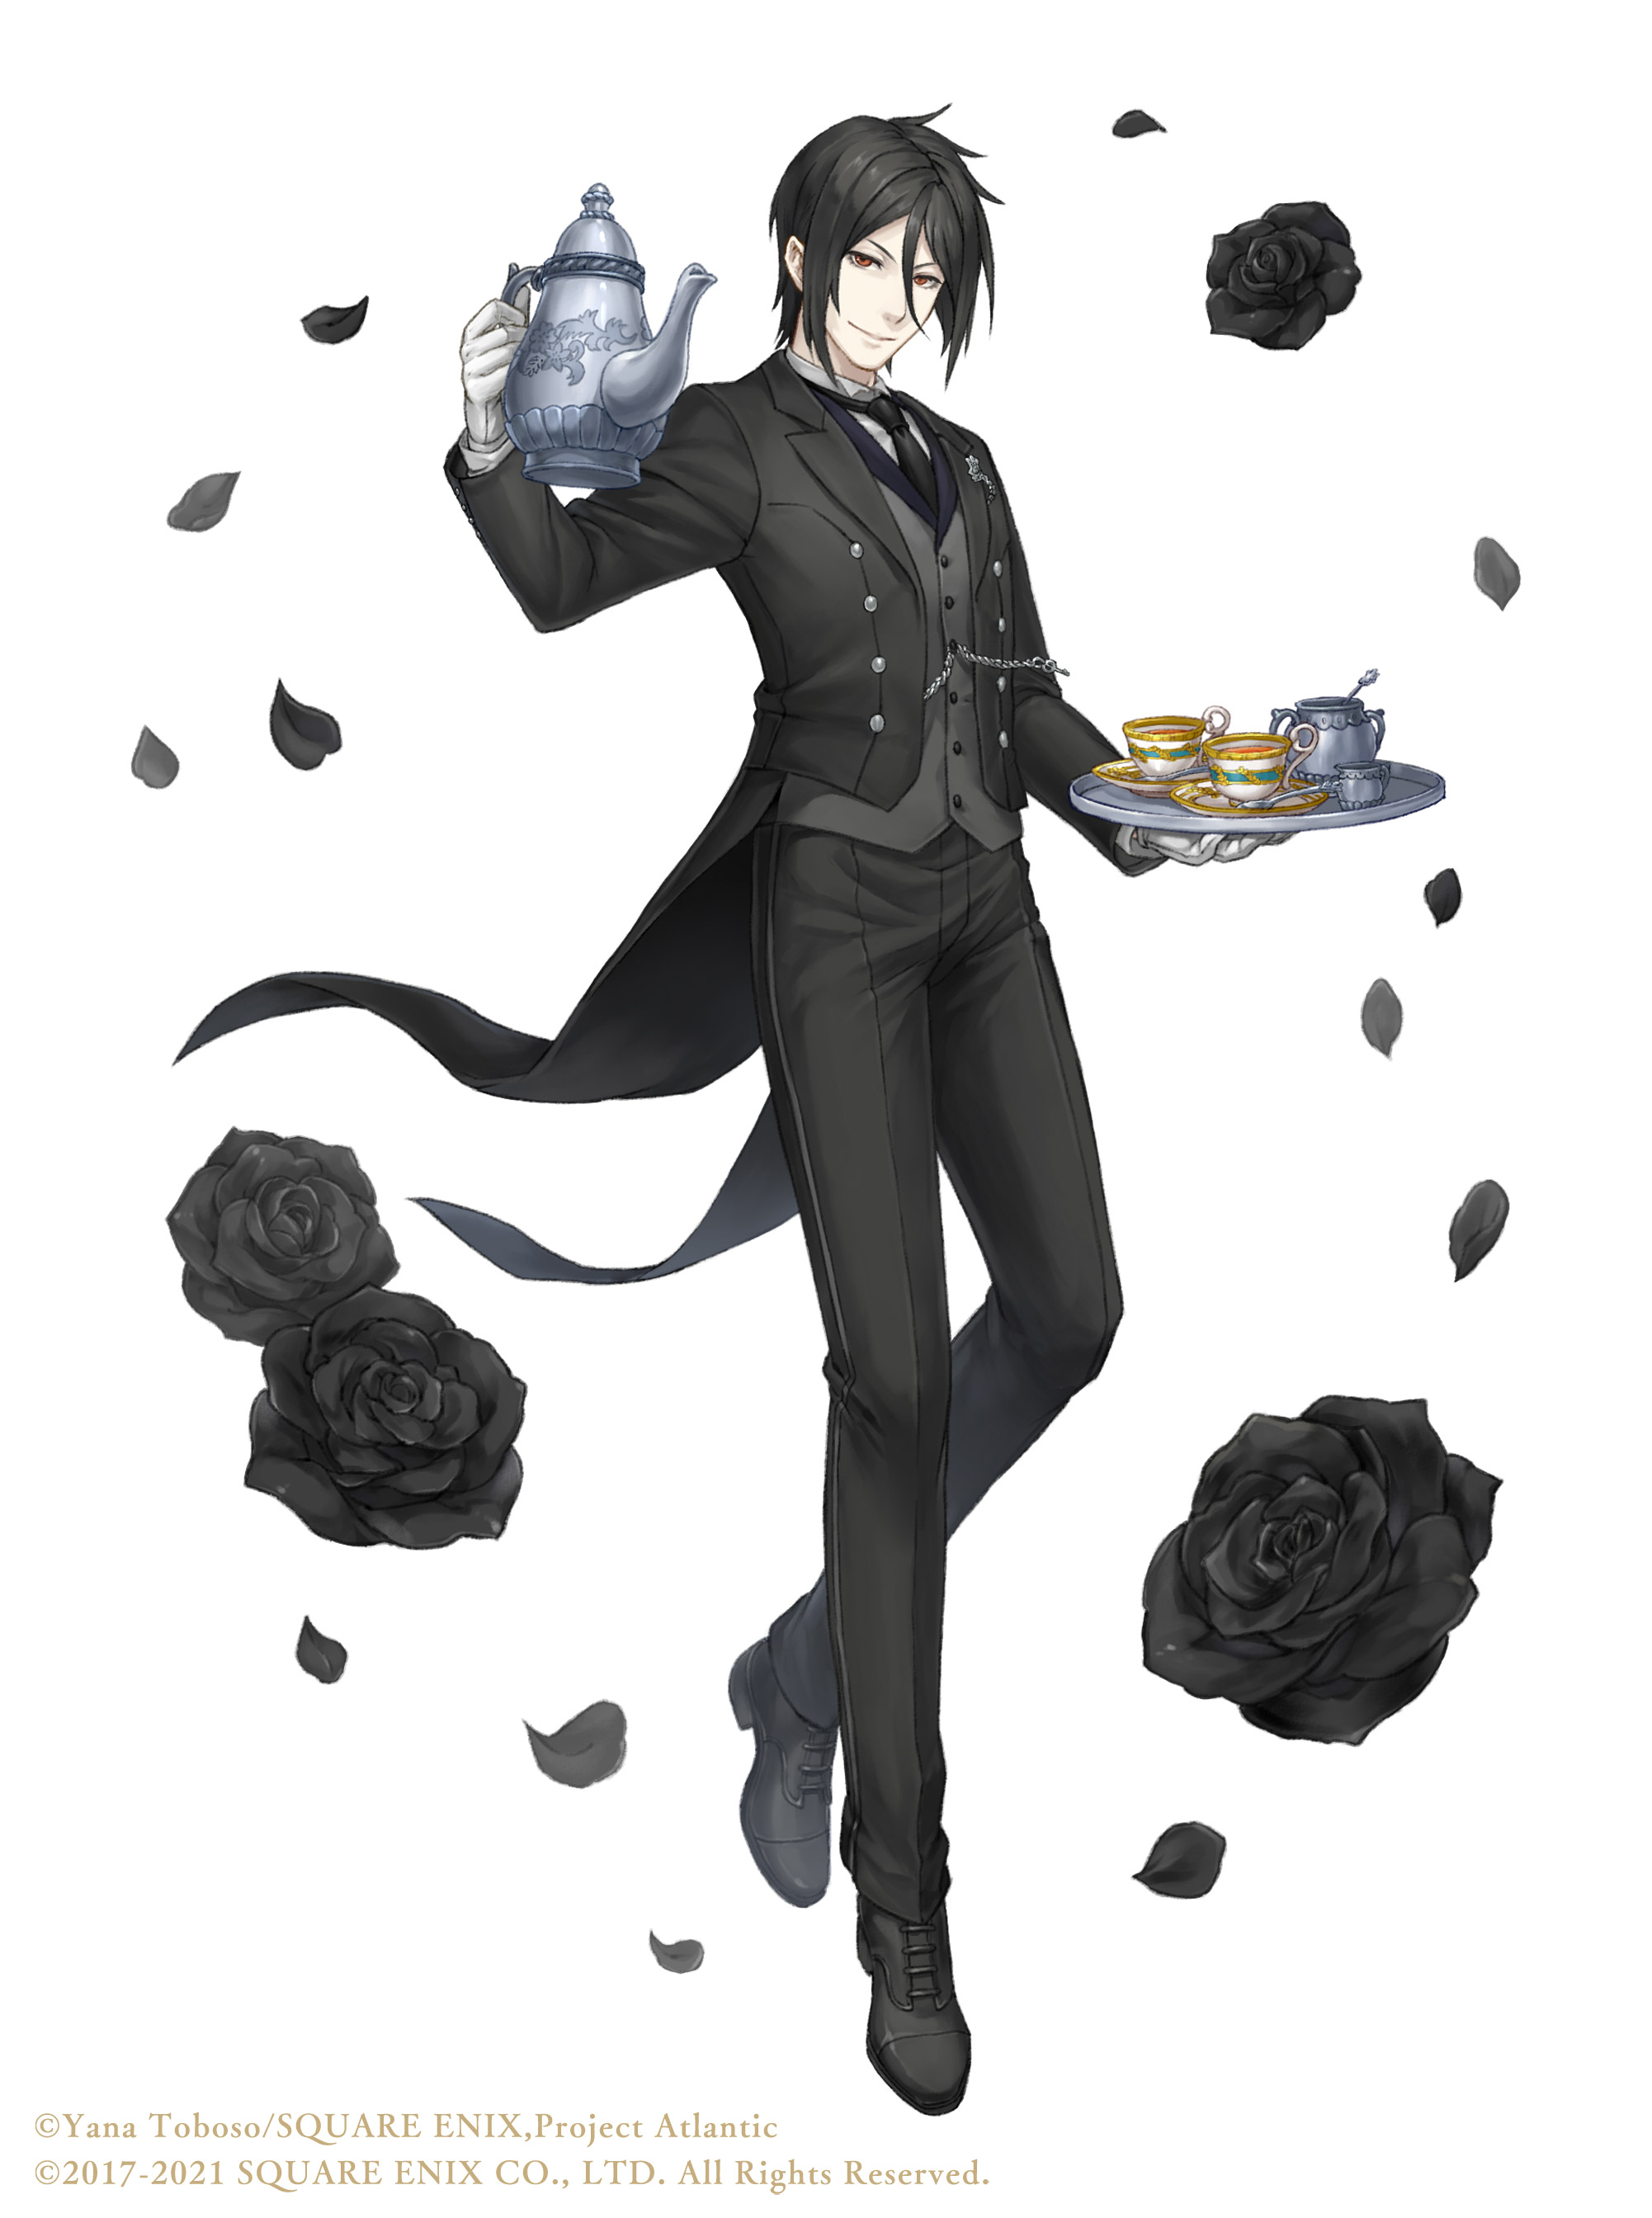 The Dark Gender Politics of Black Butler Are The Secret To Its Success   iwantedwings